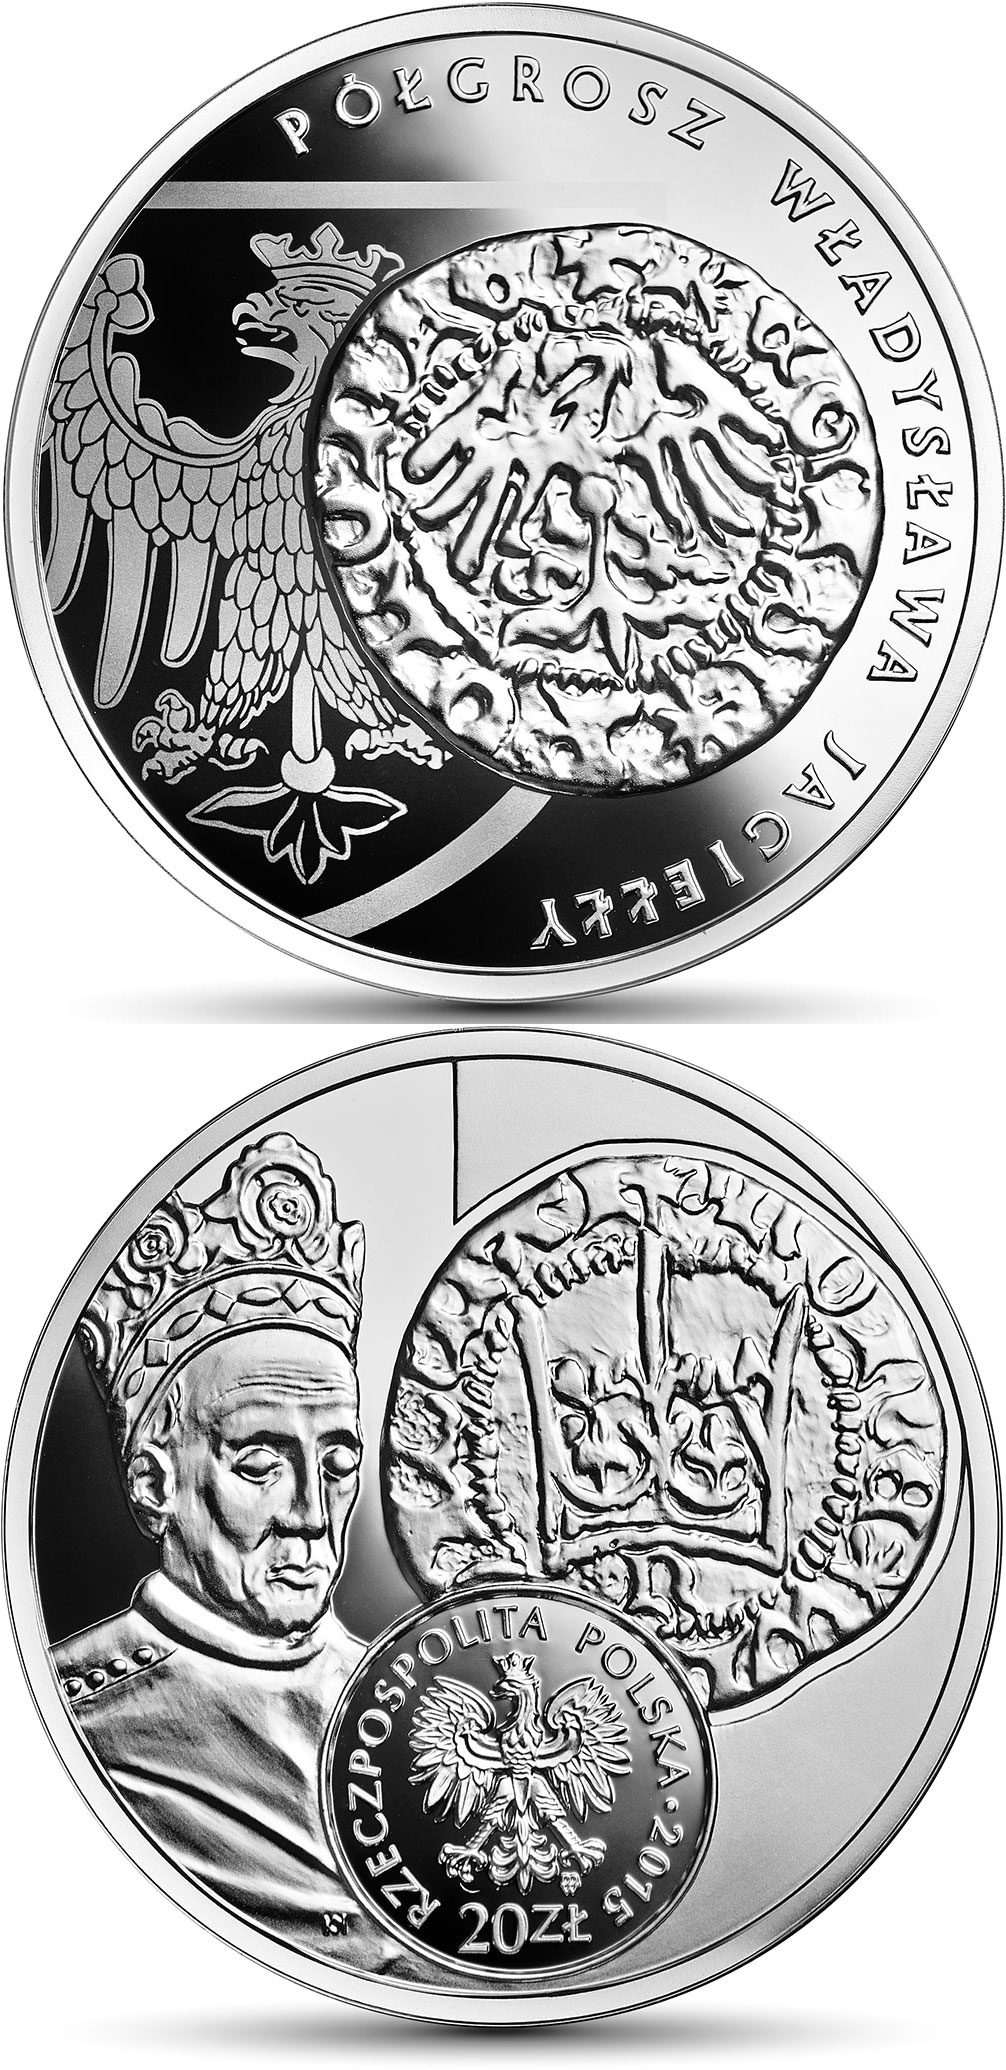 Image of 20 zloty coin - The half grosz of Ladislas Jagiello  | Poland 2015.  The Silver coin is of Proof quality.